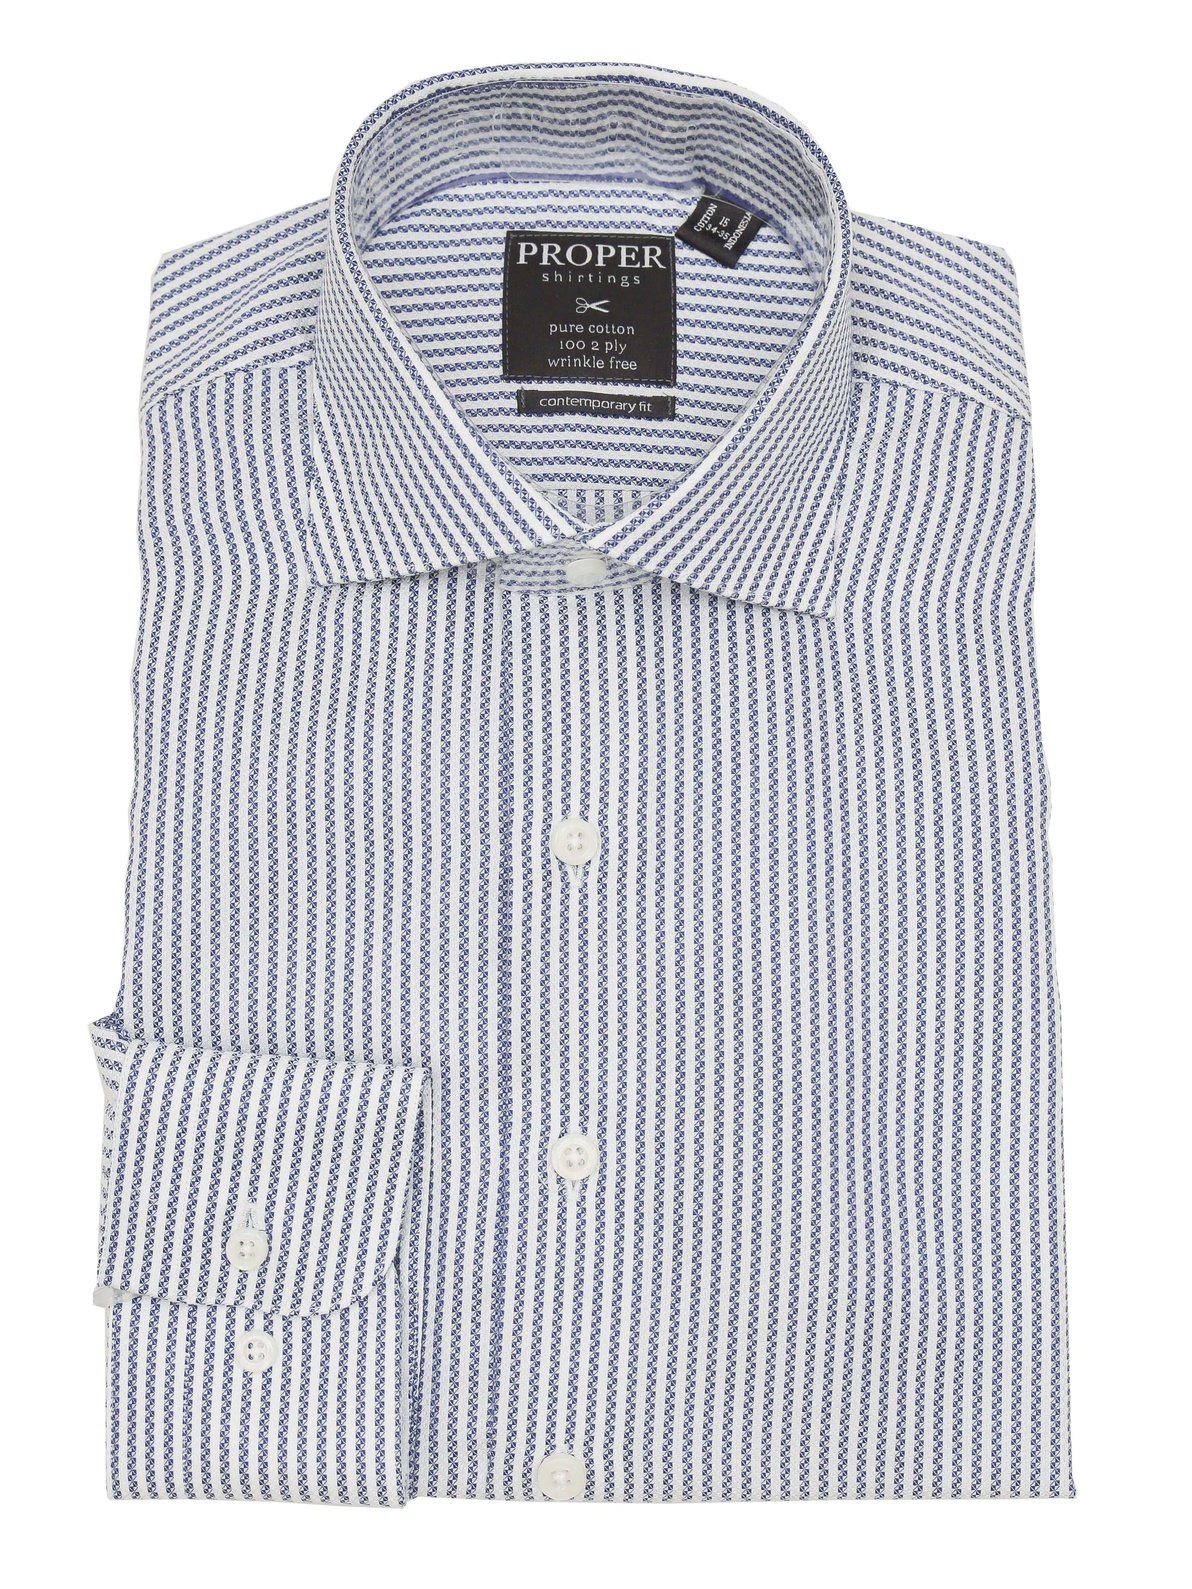 Mens Blue Slim Fit Shirt With White Collar